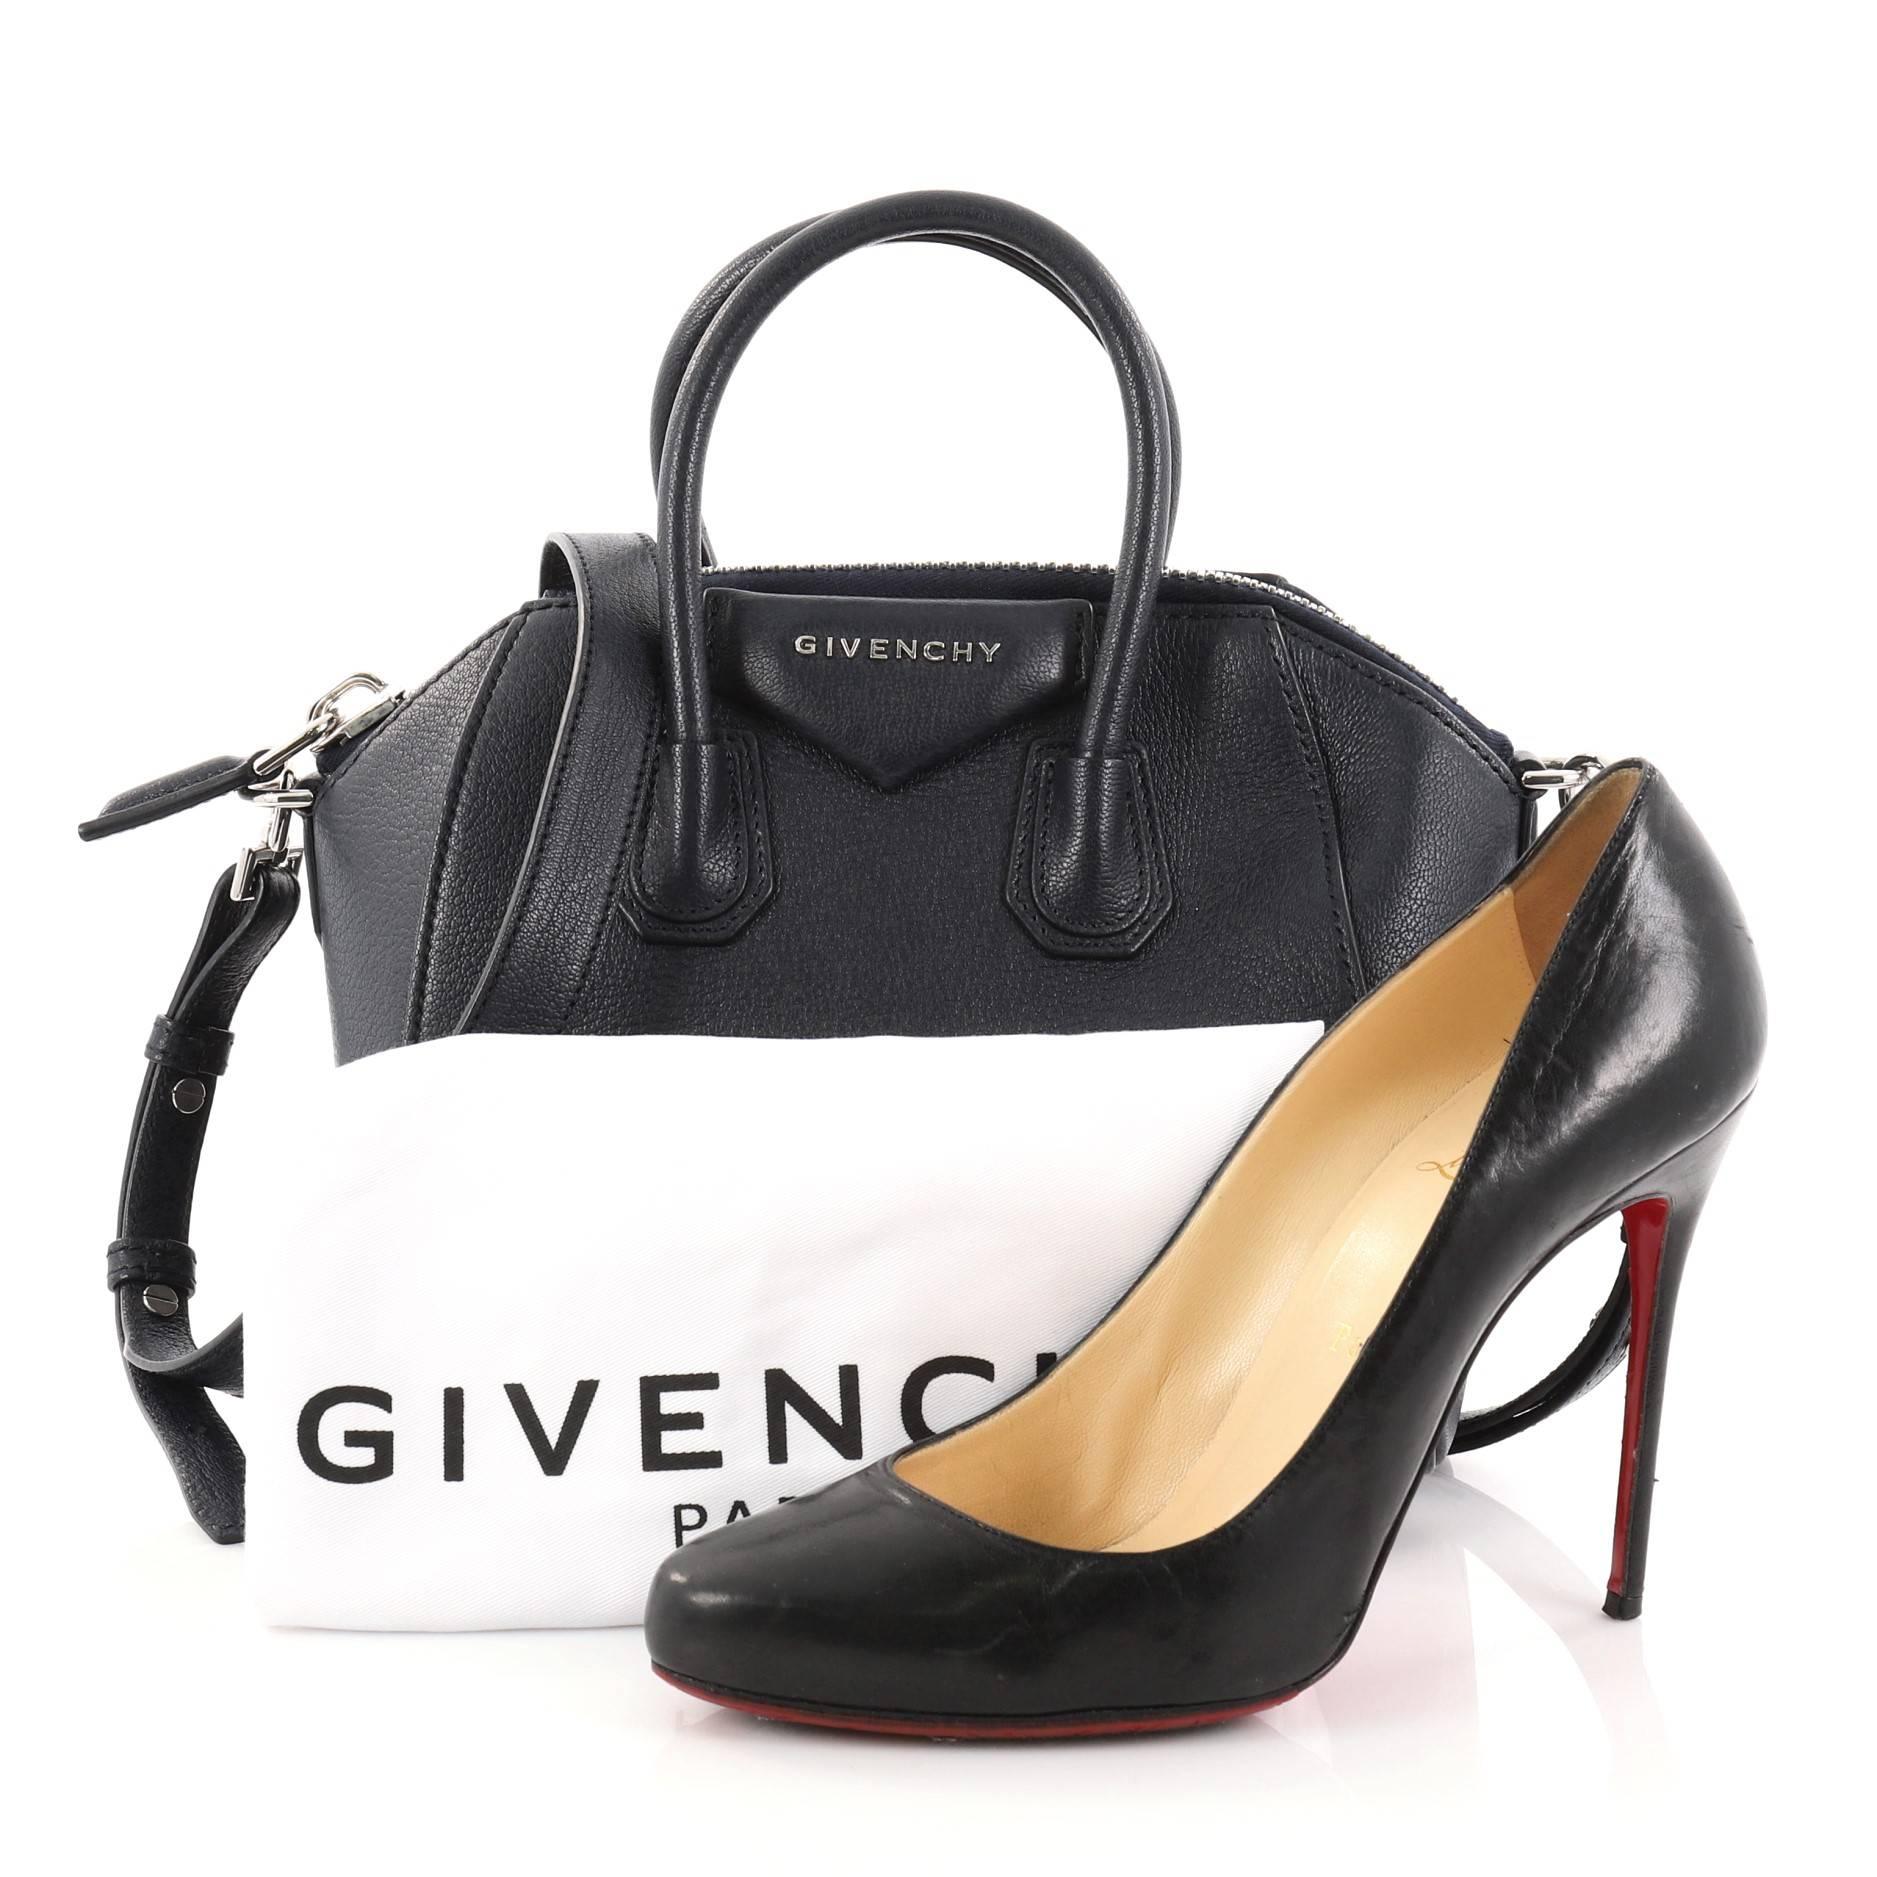 This authentic Givenchy Antigona Bag Leather Mini presents the brand's most iconic bag in a miniature version. Crafted from supple navy leather, this structured handle bag features the brand's signature envelope flap detail with silver Givenchy